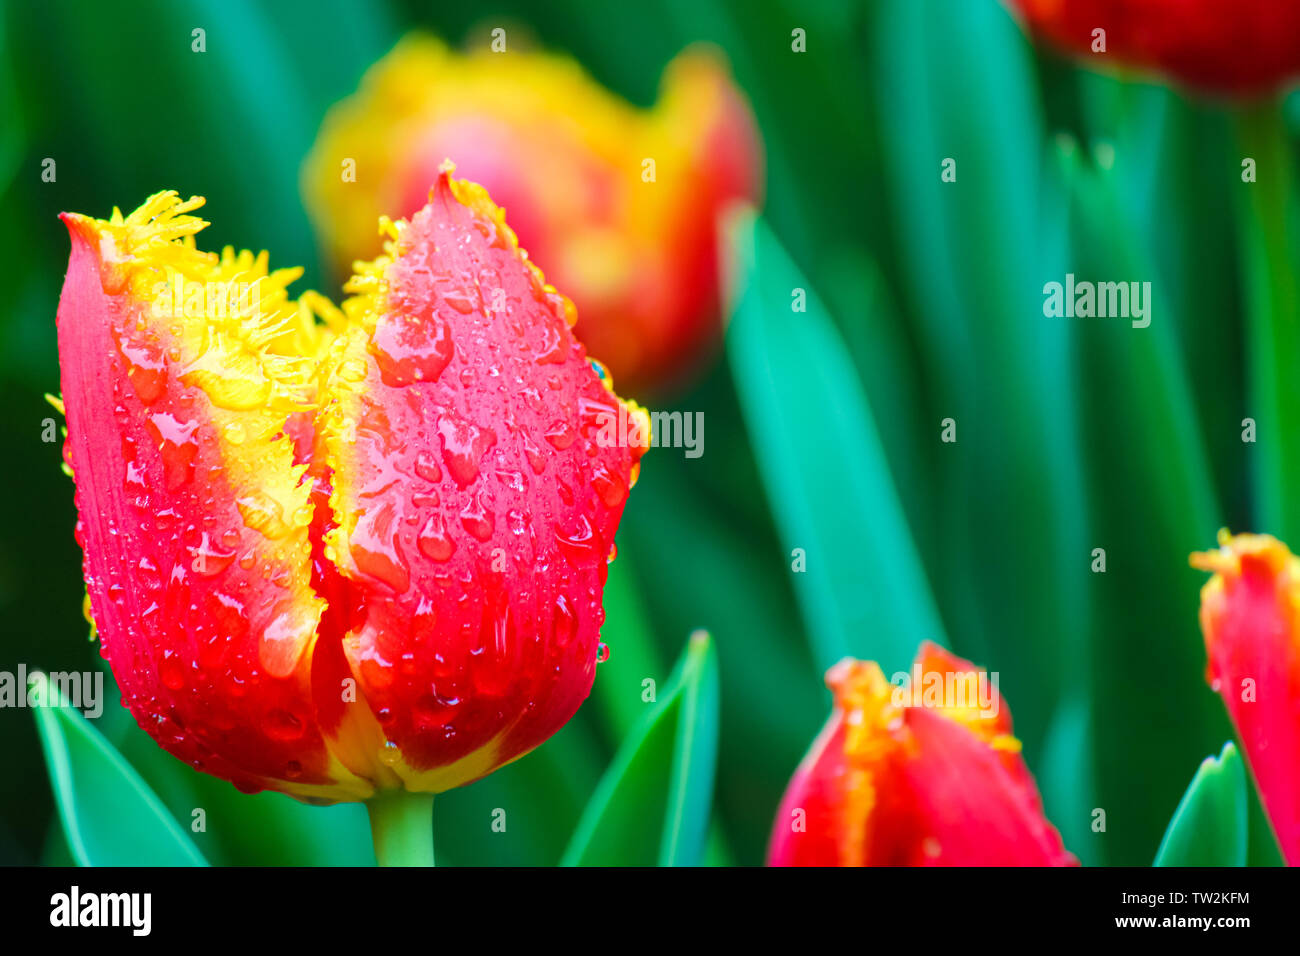 Marvelous macro picture of red yellow tulip with drops of morning dew. Blurred green background. Dutch symbol, Netherlands tulips, macro nature, macro flowers. Beautiful background. Stock Photo